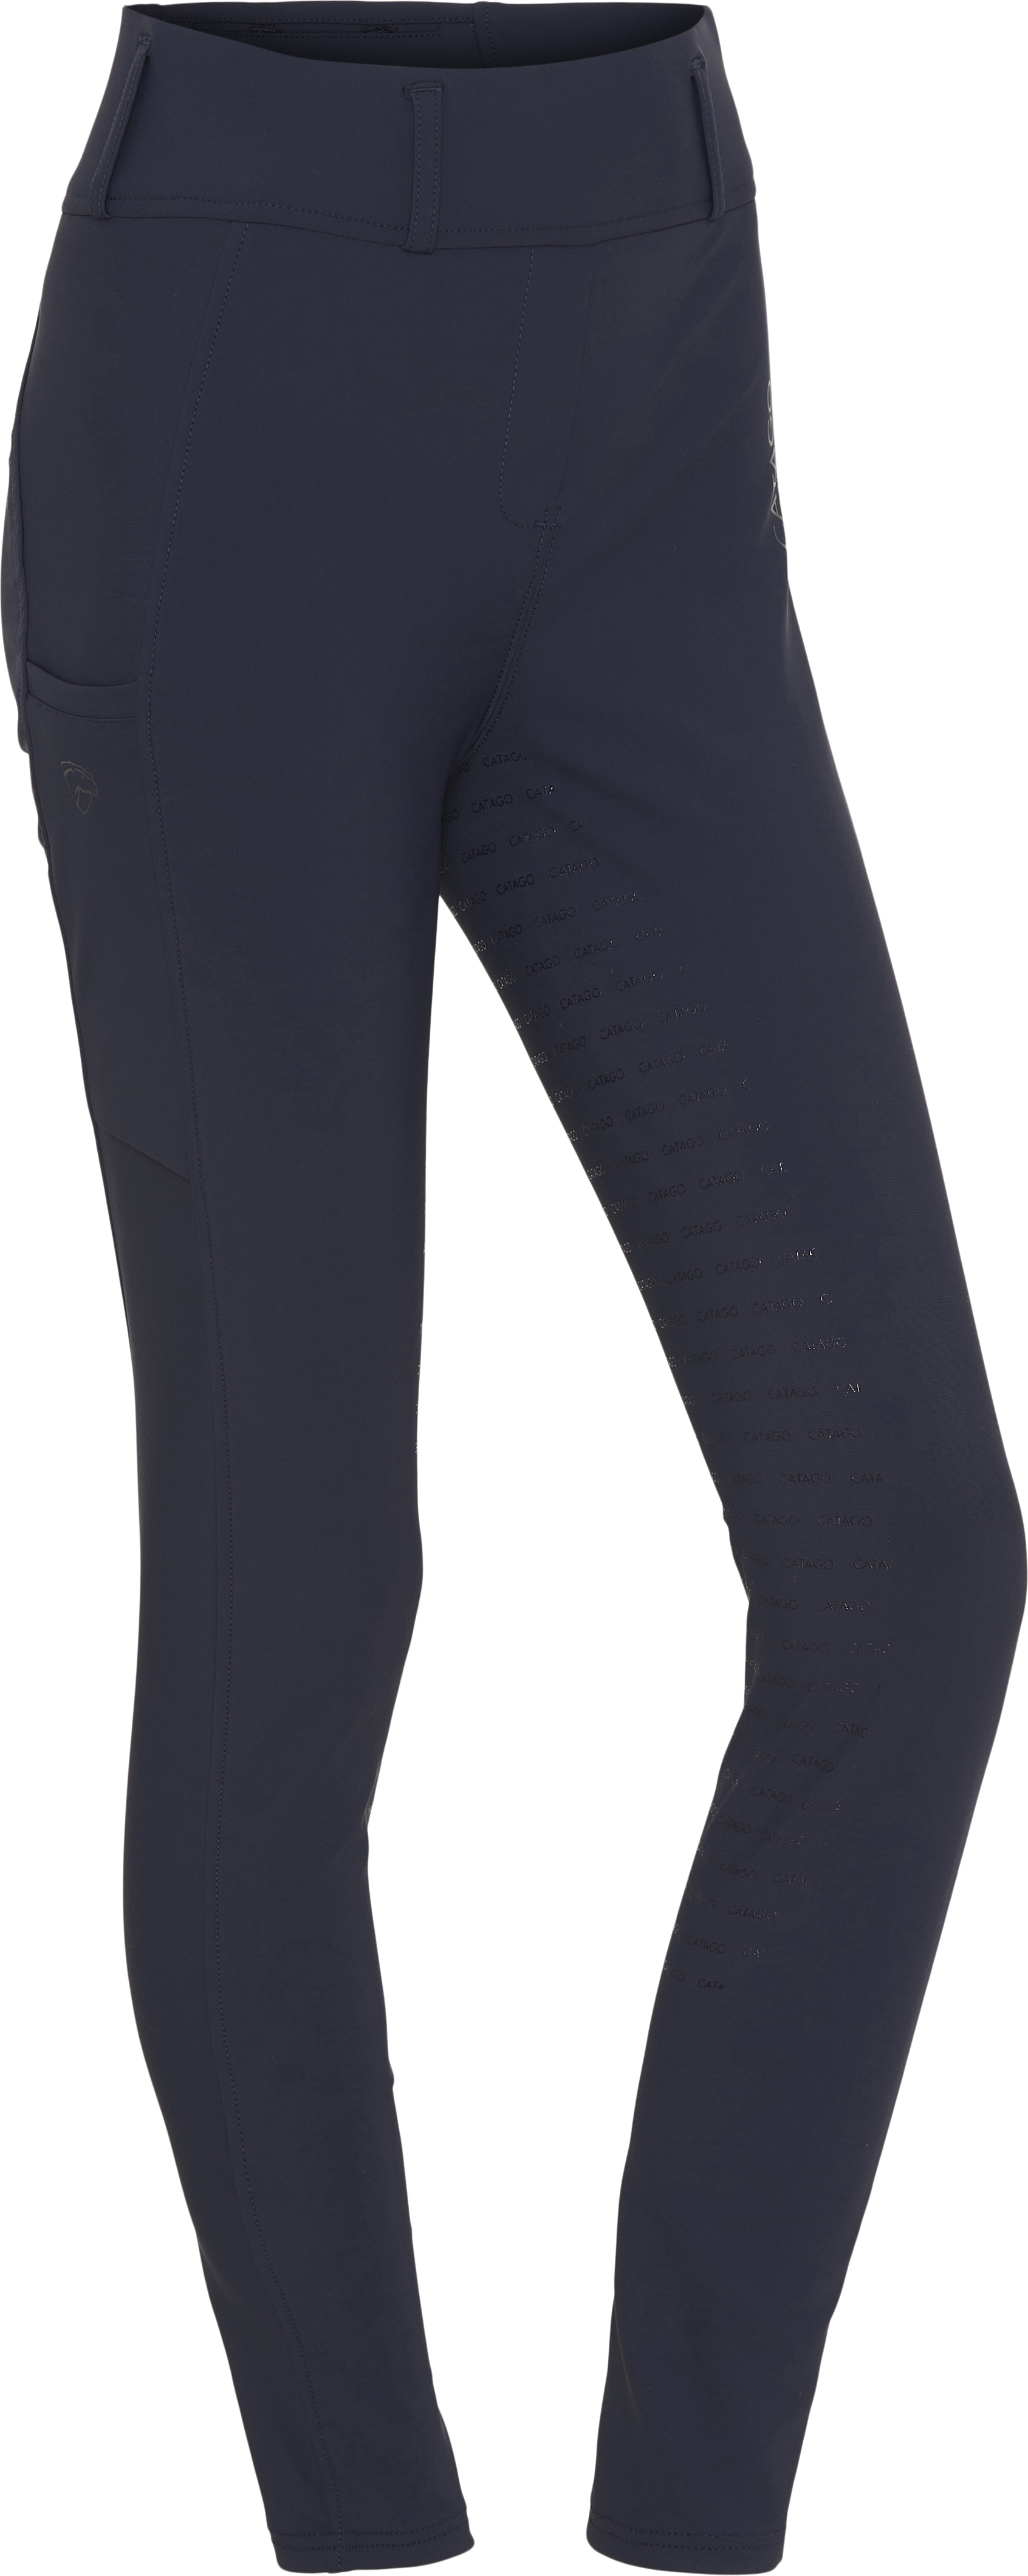 CATAGO River Tights Fullgrip With Belt Loops - Navy (L), Catago